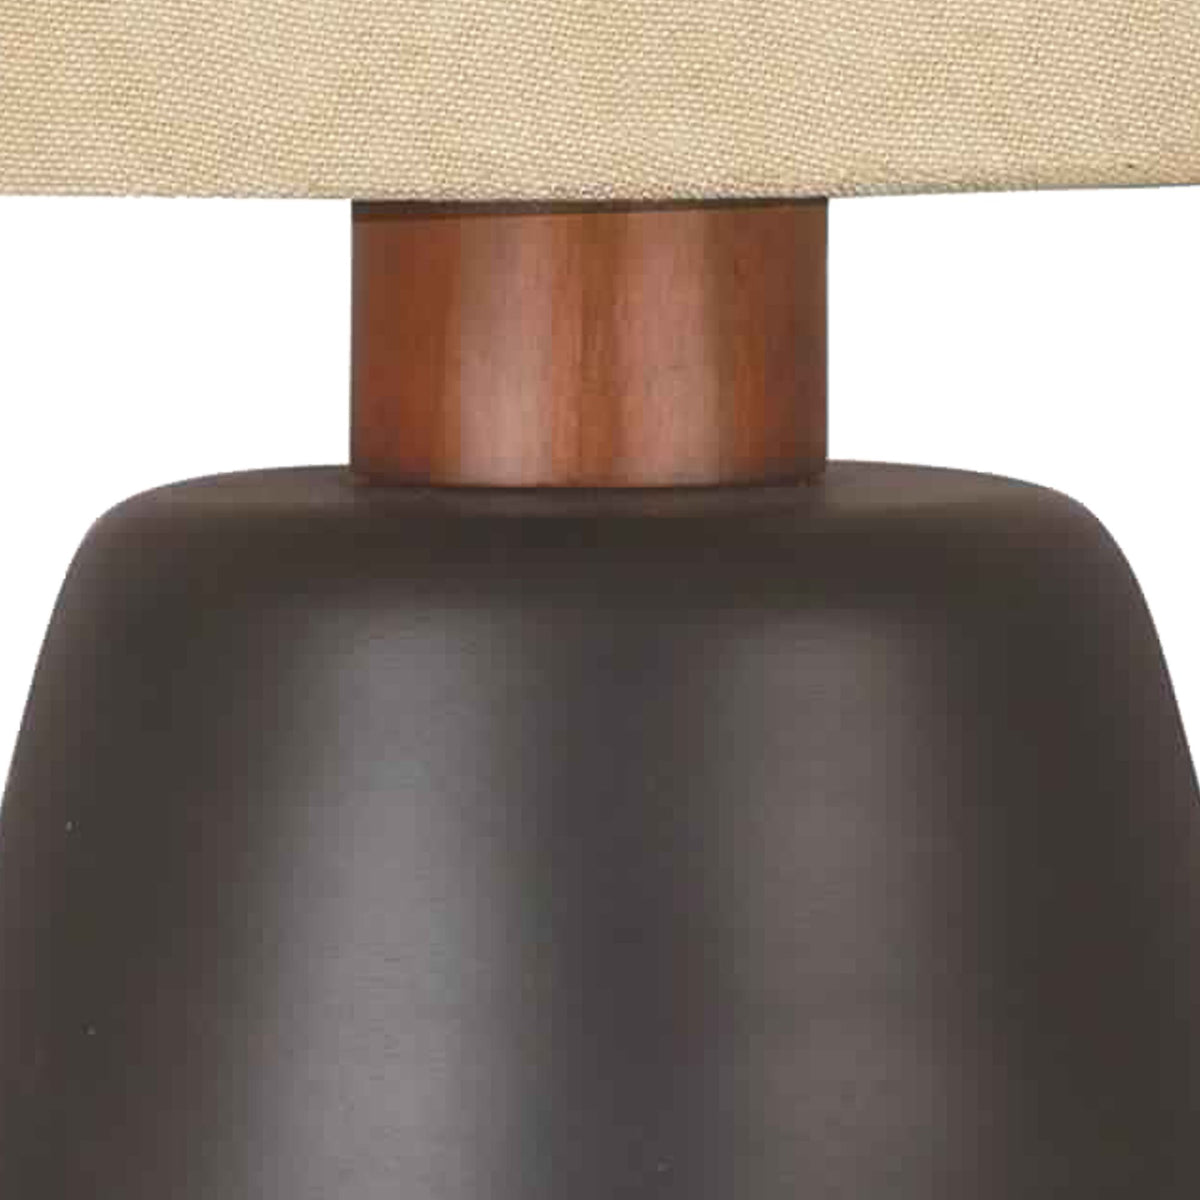 Metal Frame Table Lamp with Fabric Shade, Beige and Black - BM226100